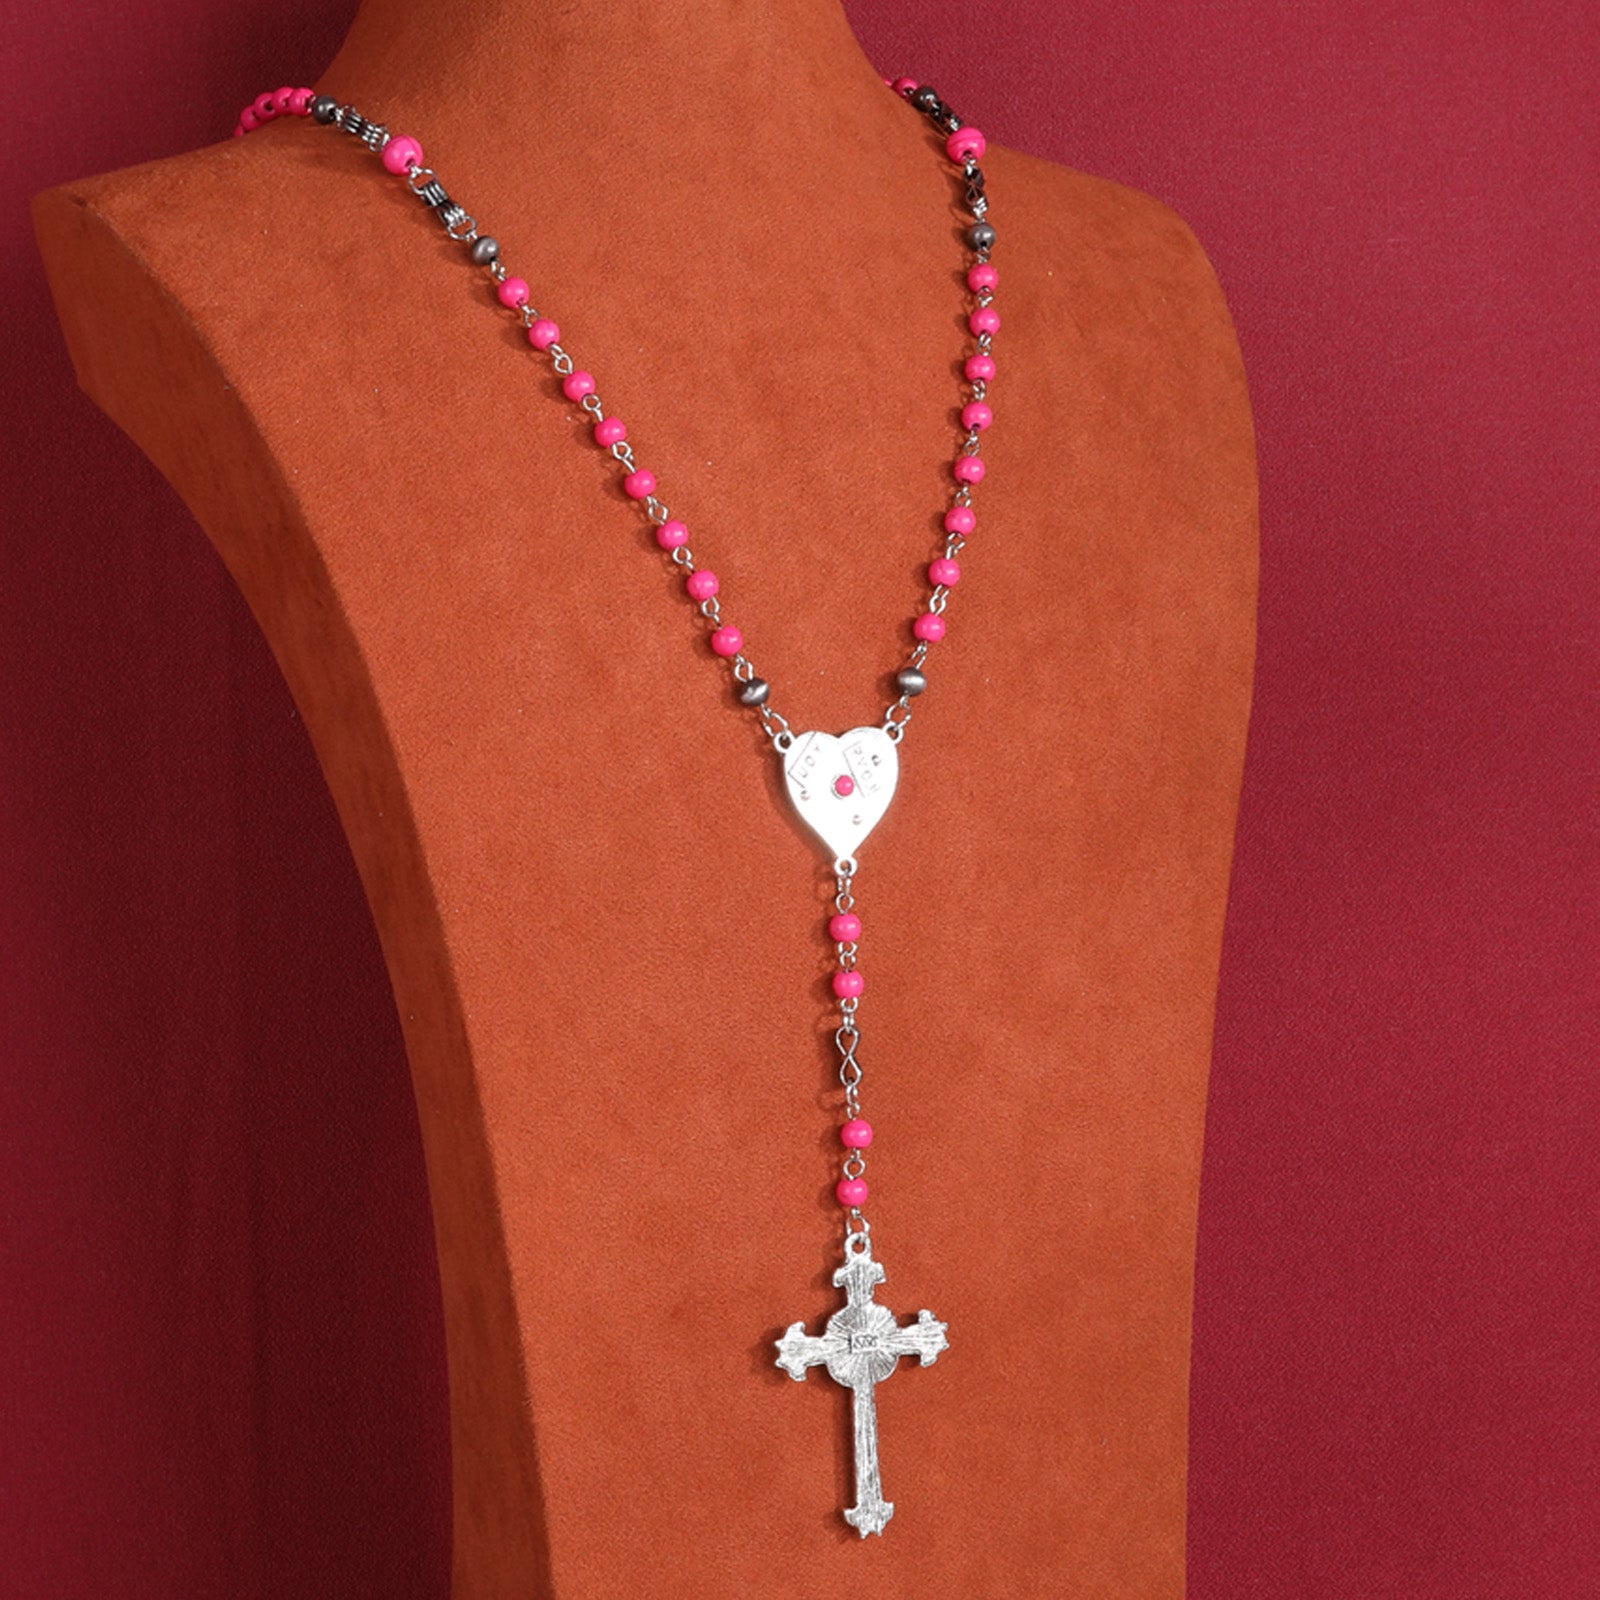 Rustic Couture's Beaded Heart Shape Cross Pendant Necklace